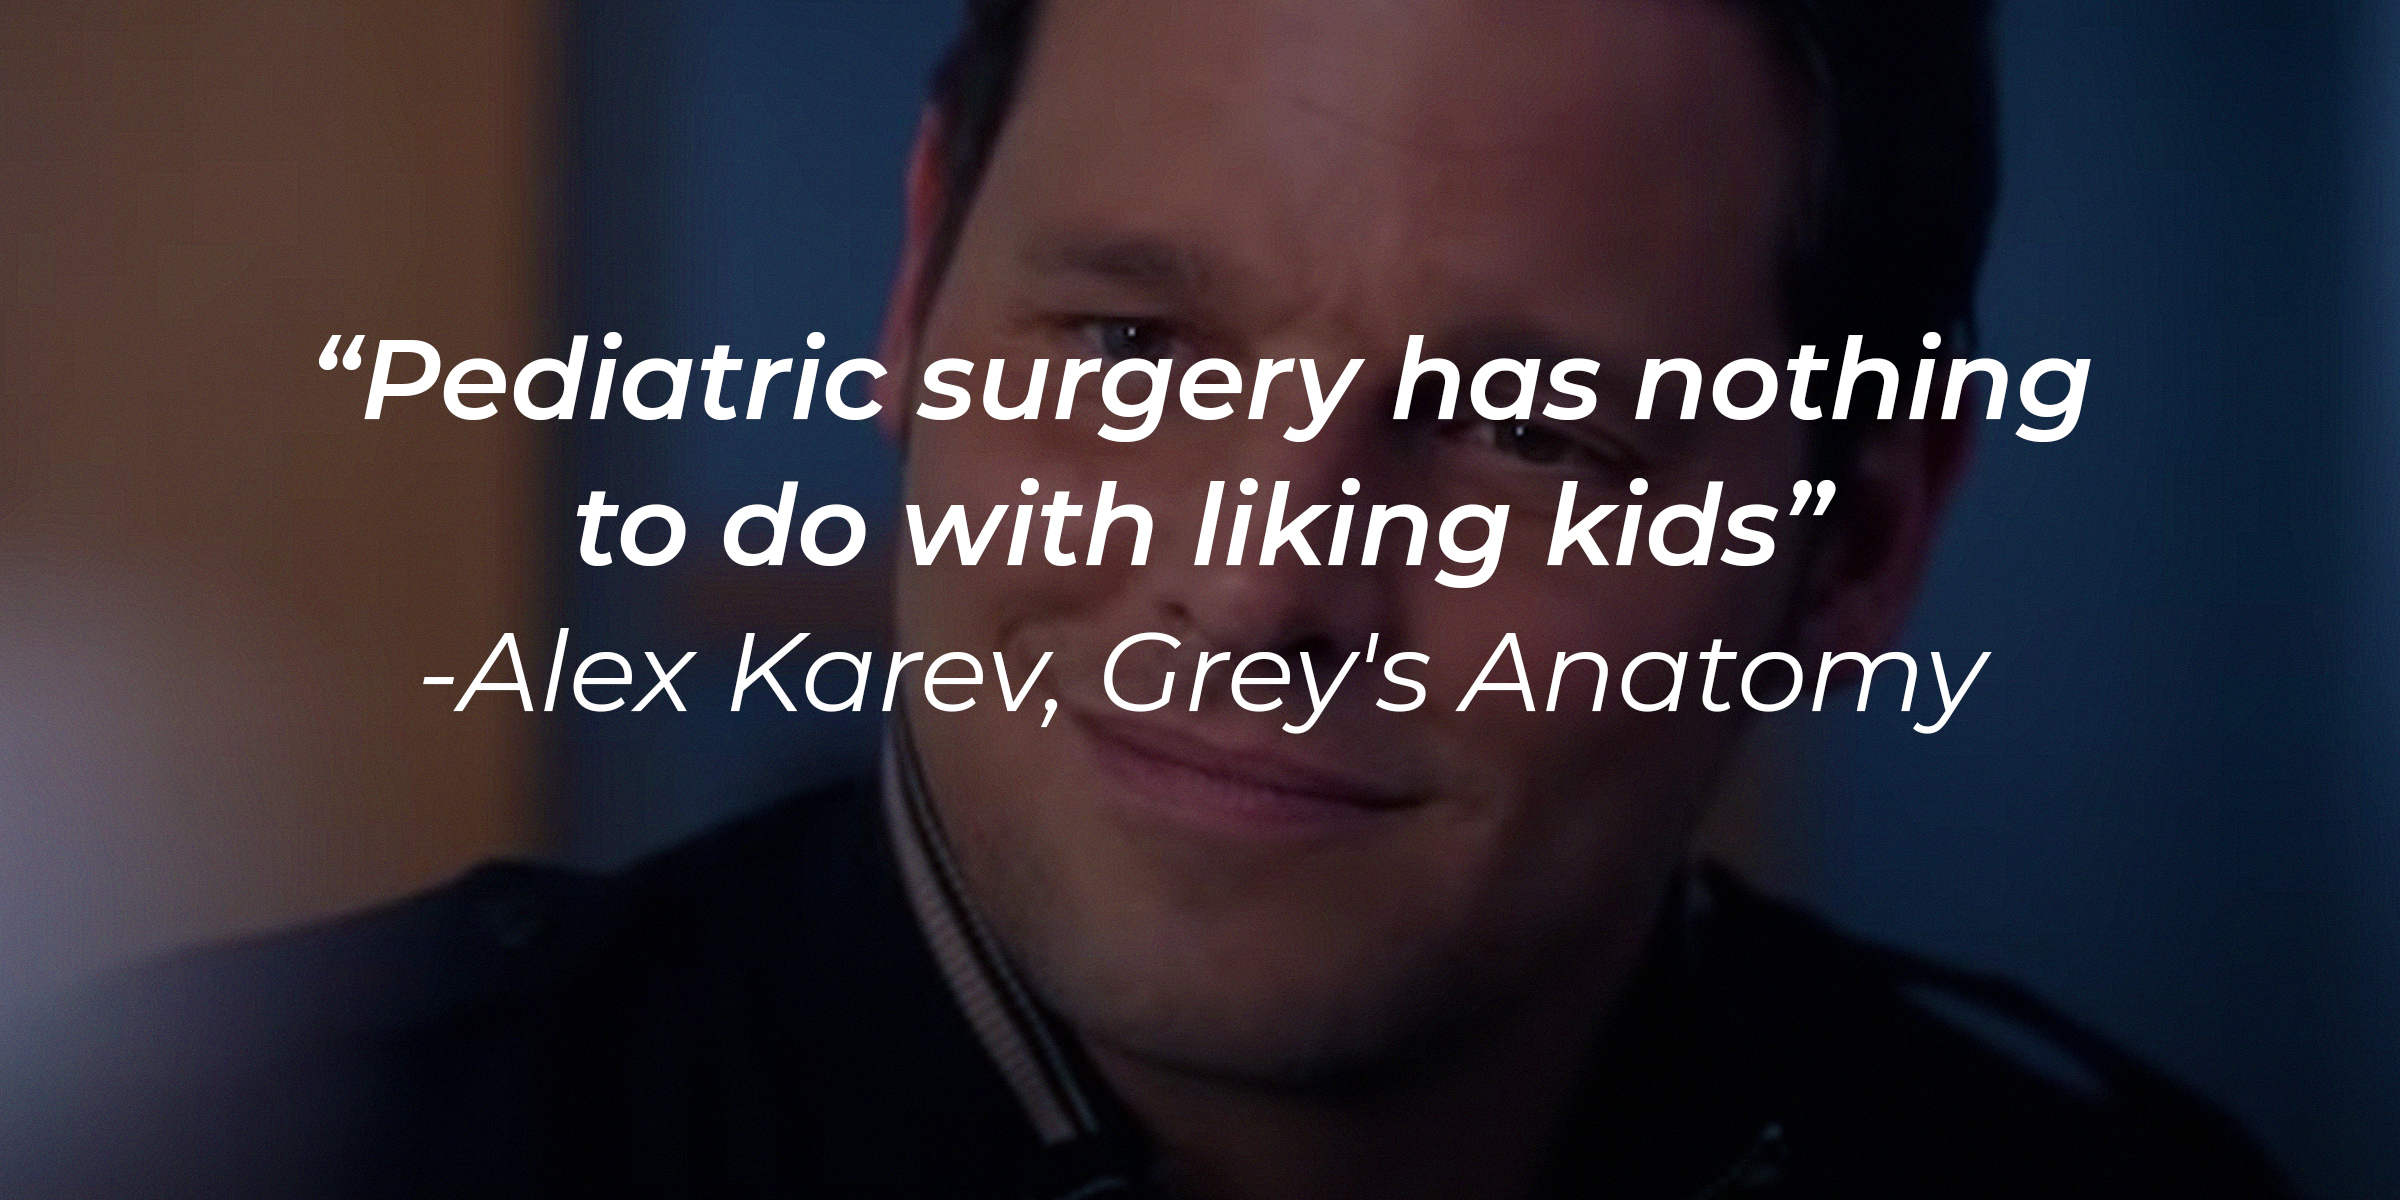 Alex Karev's image with the quote: "Pediatric surgery has nothing to do with liking kids." | Source: youtube.com/ABCNetwork